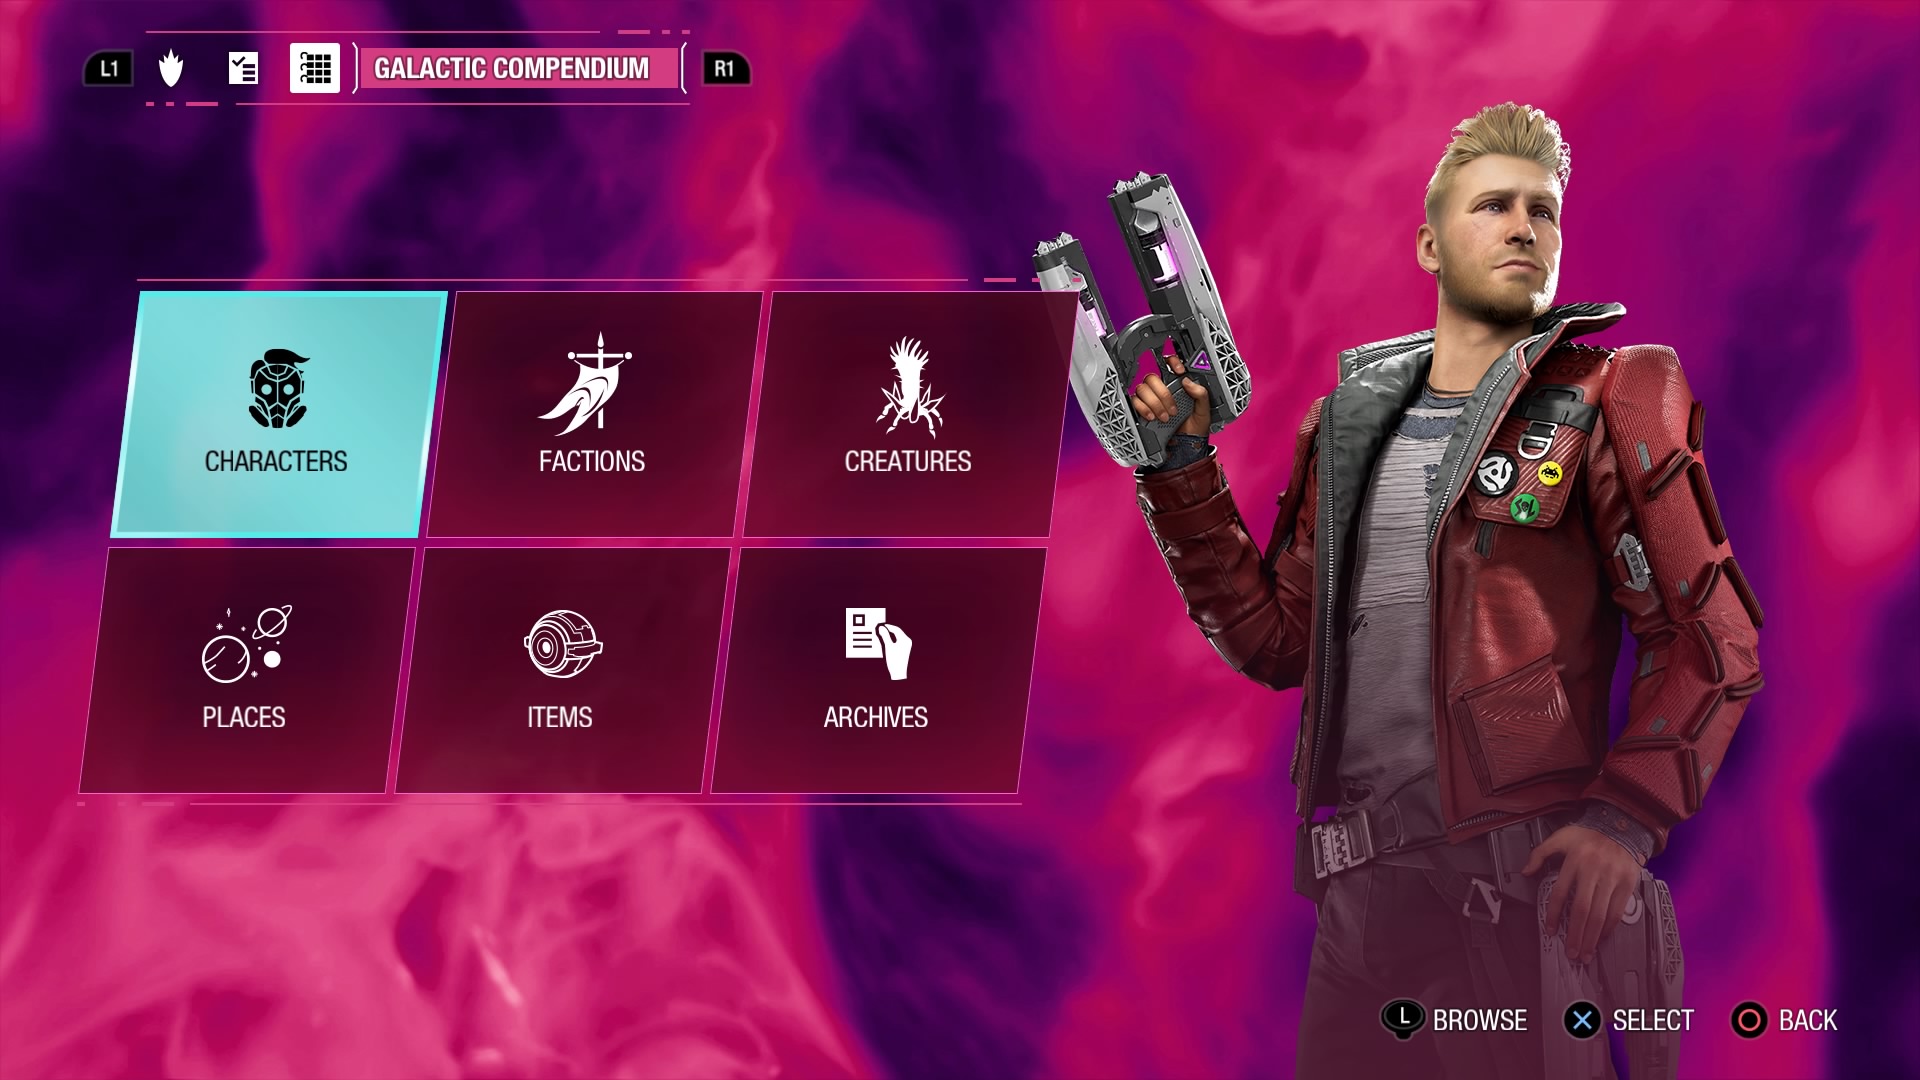 Marvel's Guardians of the Galaxy game achievements and trophies guide -  Polygon